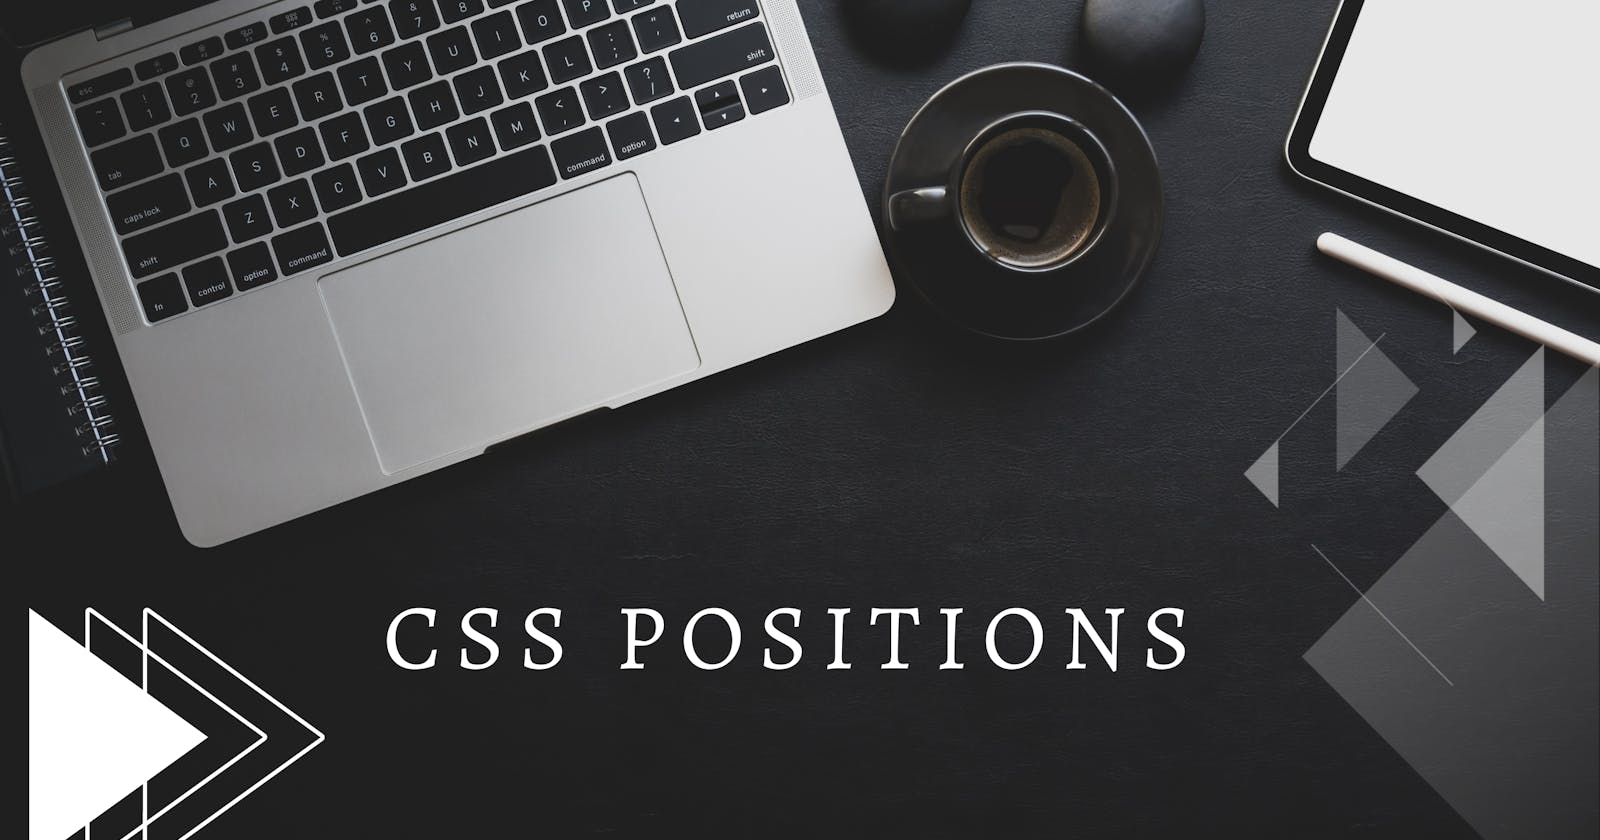 Positions in Css